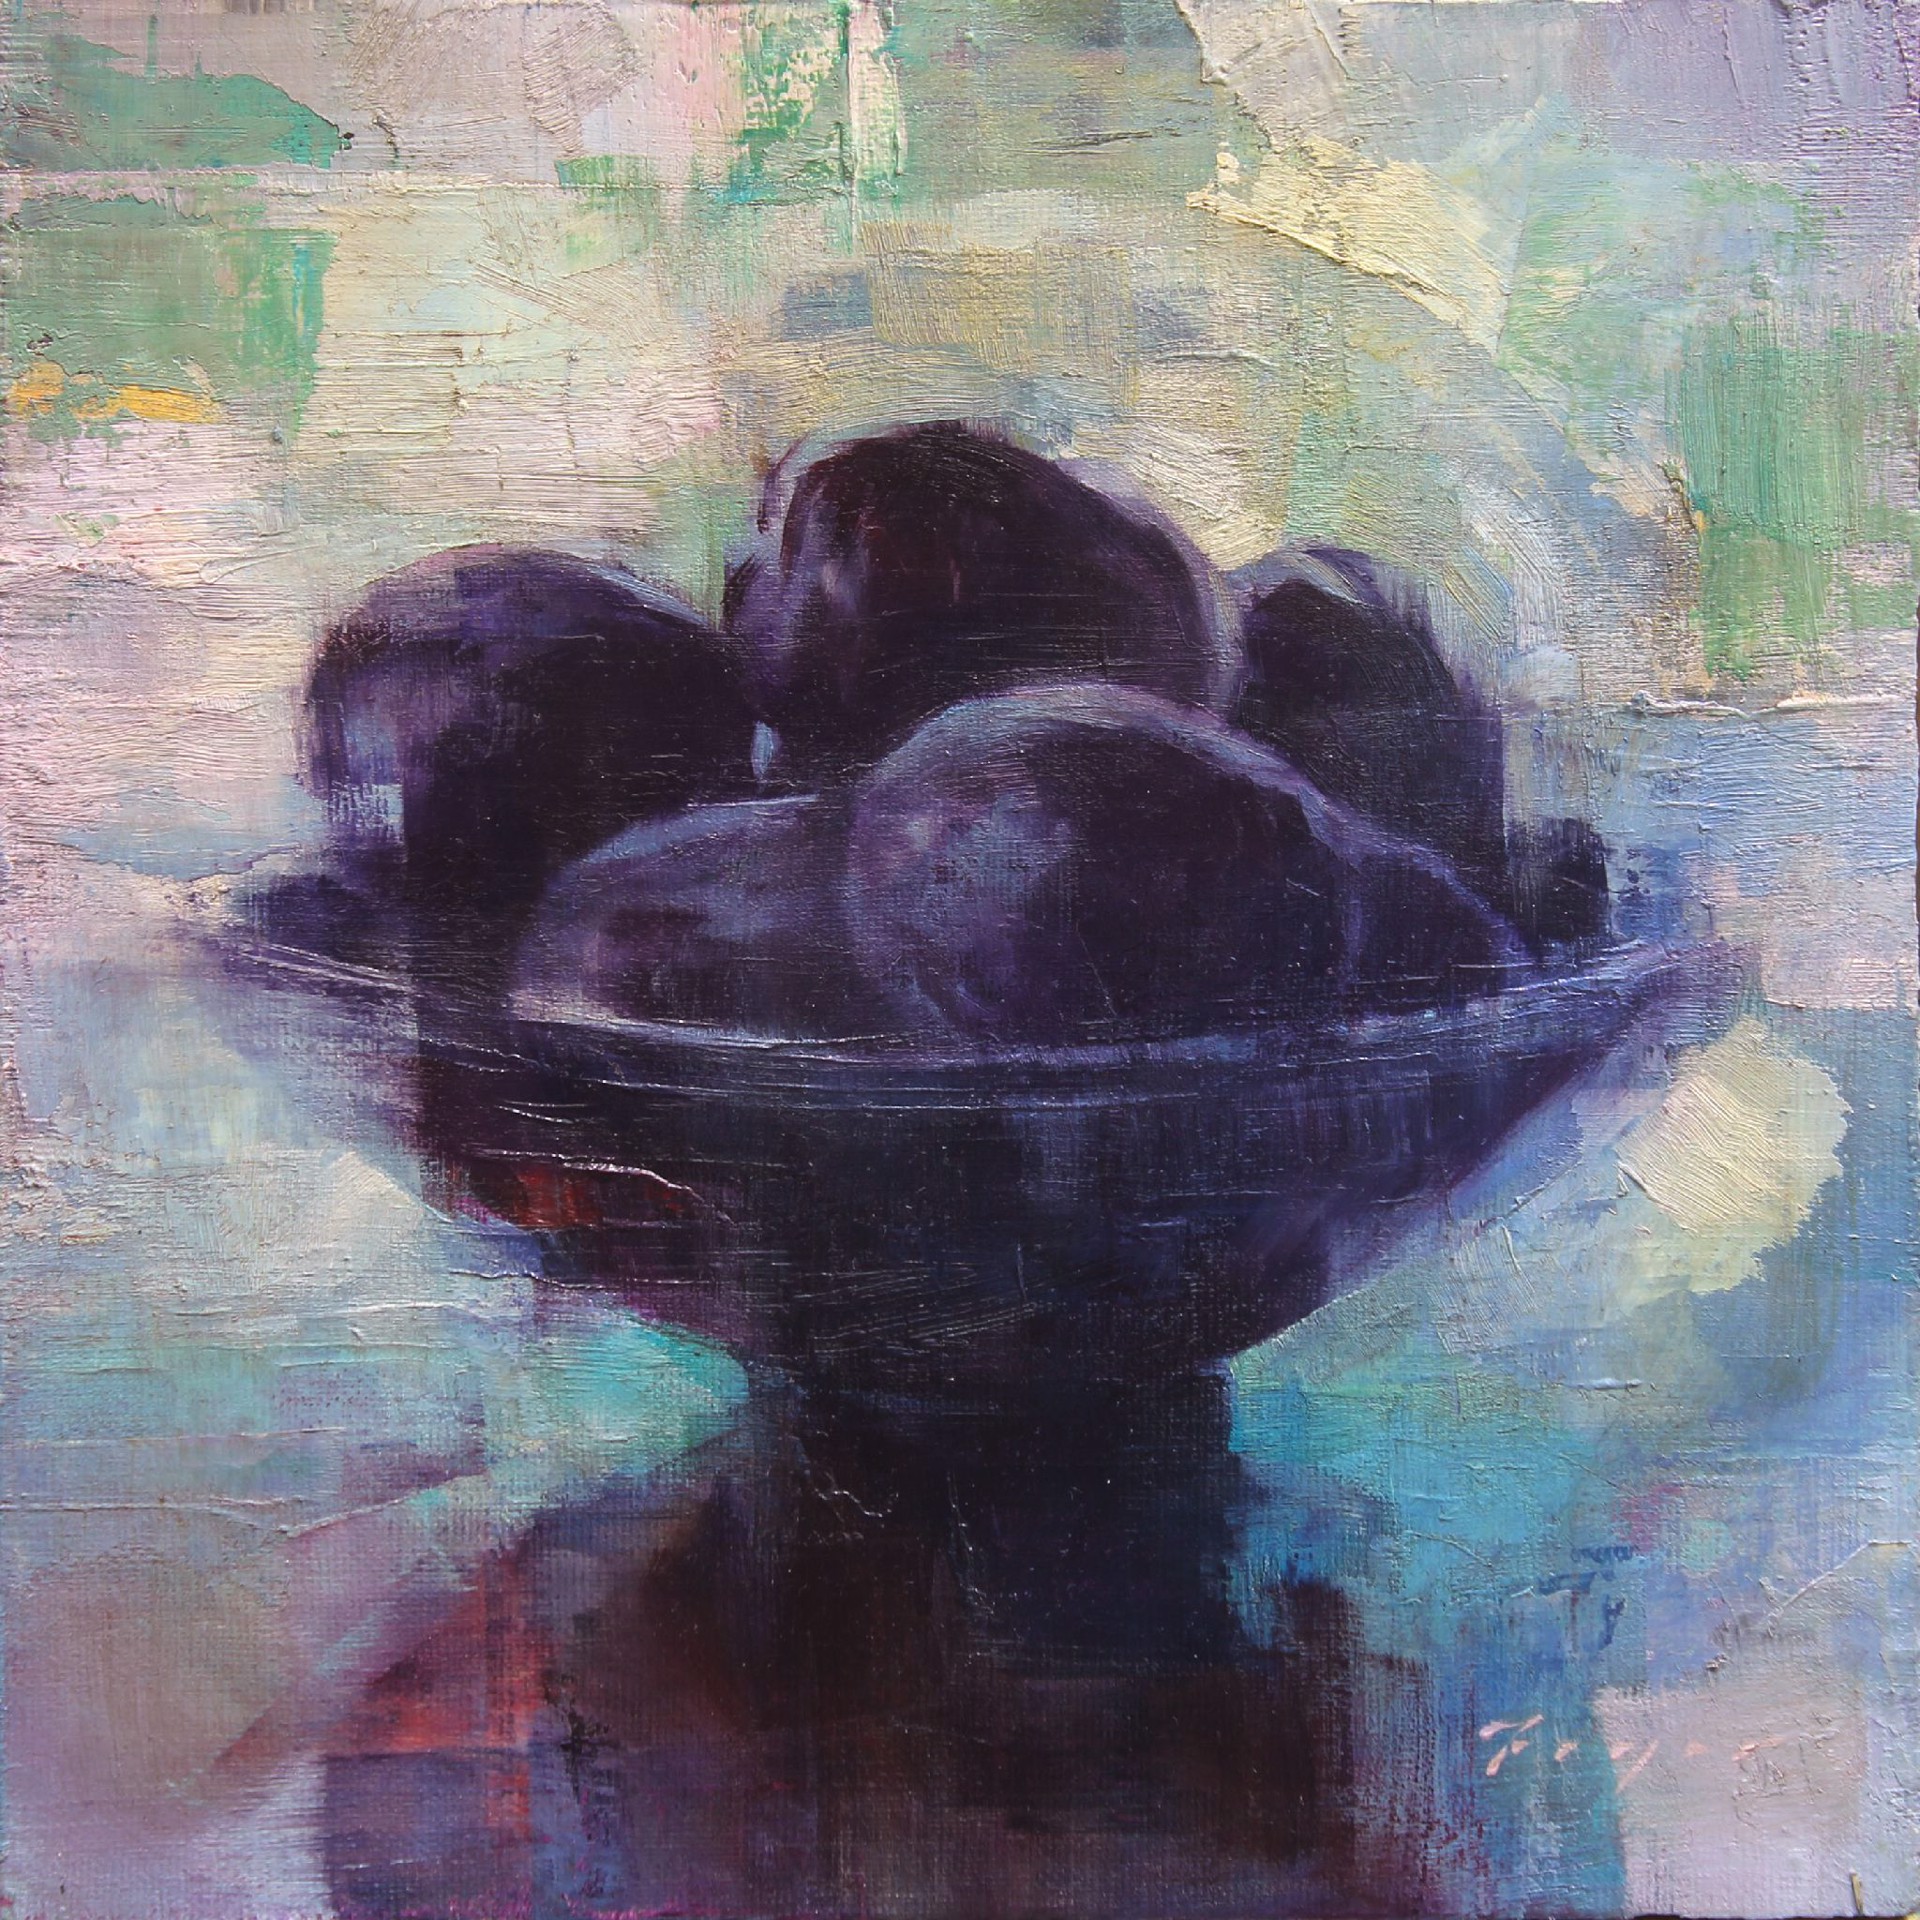 Small Bowl of Plums by Douglas Fryer